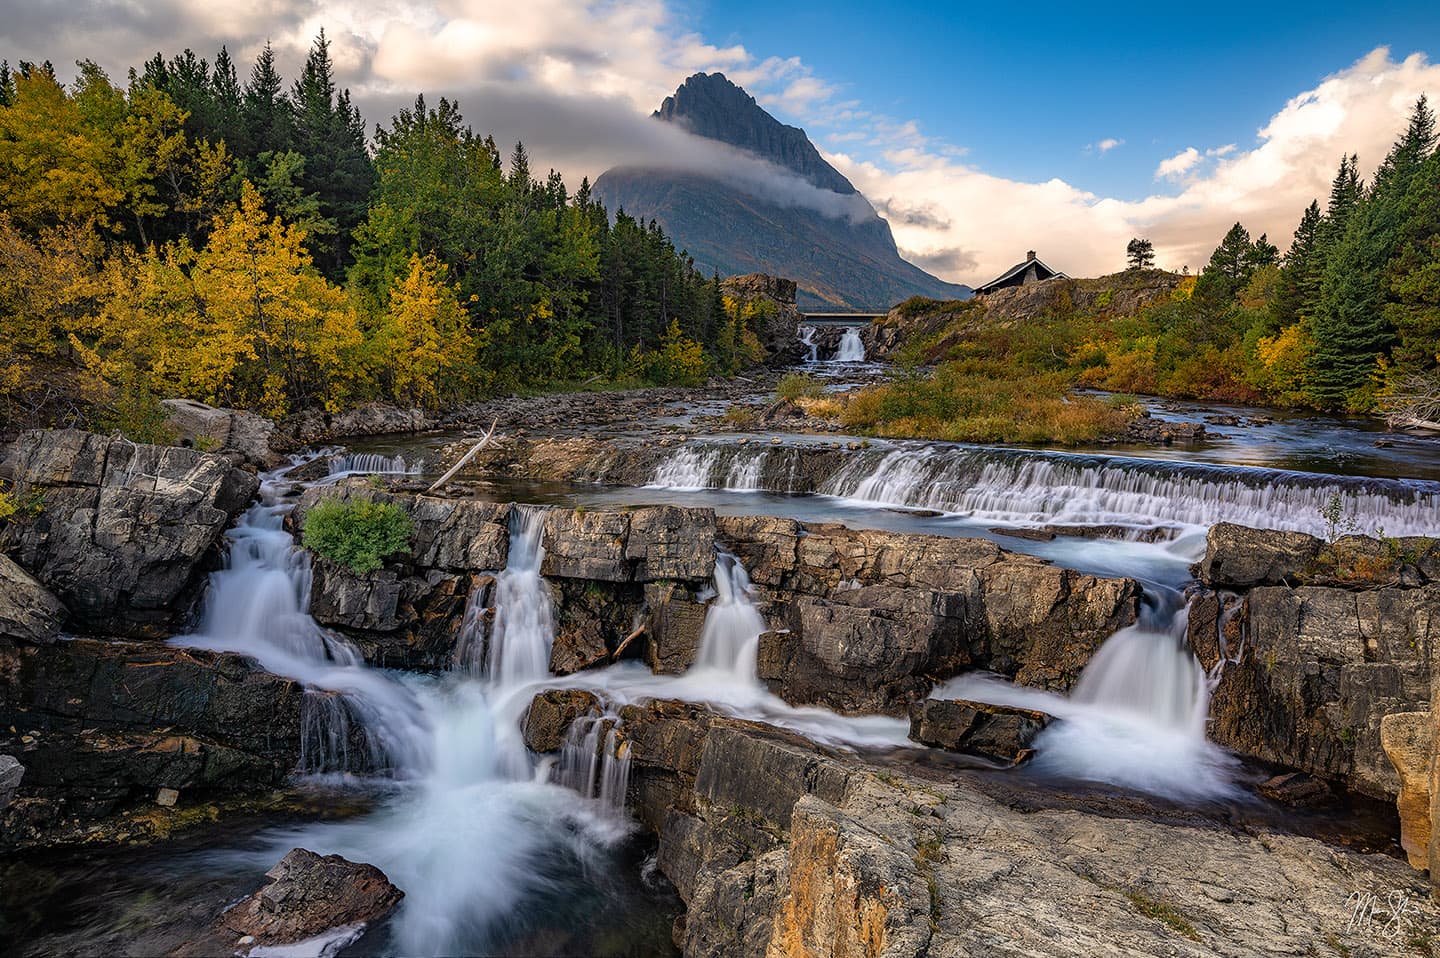 Autumn at Swiftcurrent Falls - Swiftcurrent Lake, Glacier National Park, Montana